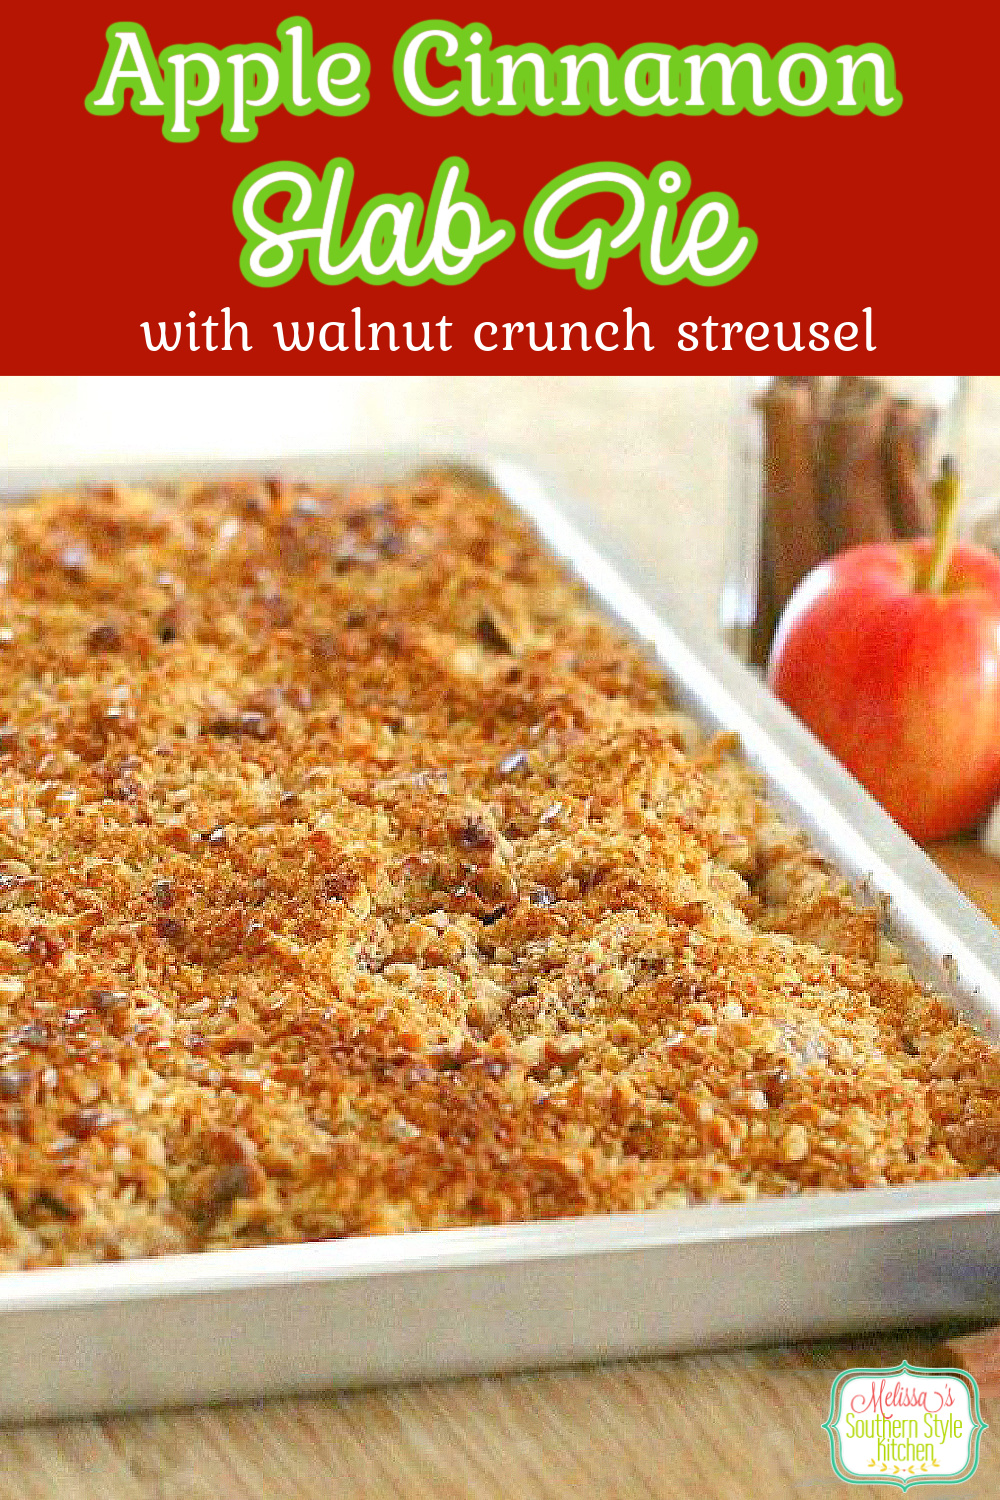 Apple Slab Pie with a Walnut Crunch Streusel makes a stellar sweet ending to any meal #applepie #appleslabpie #streuseltoppedpie #applecrumbpie #apples #fallbaking #harvestrecipes #thanksgivingdesserts #southernrecipes #southernfood #desserts #dessertfoodrecipes